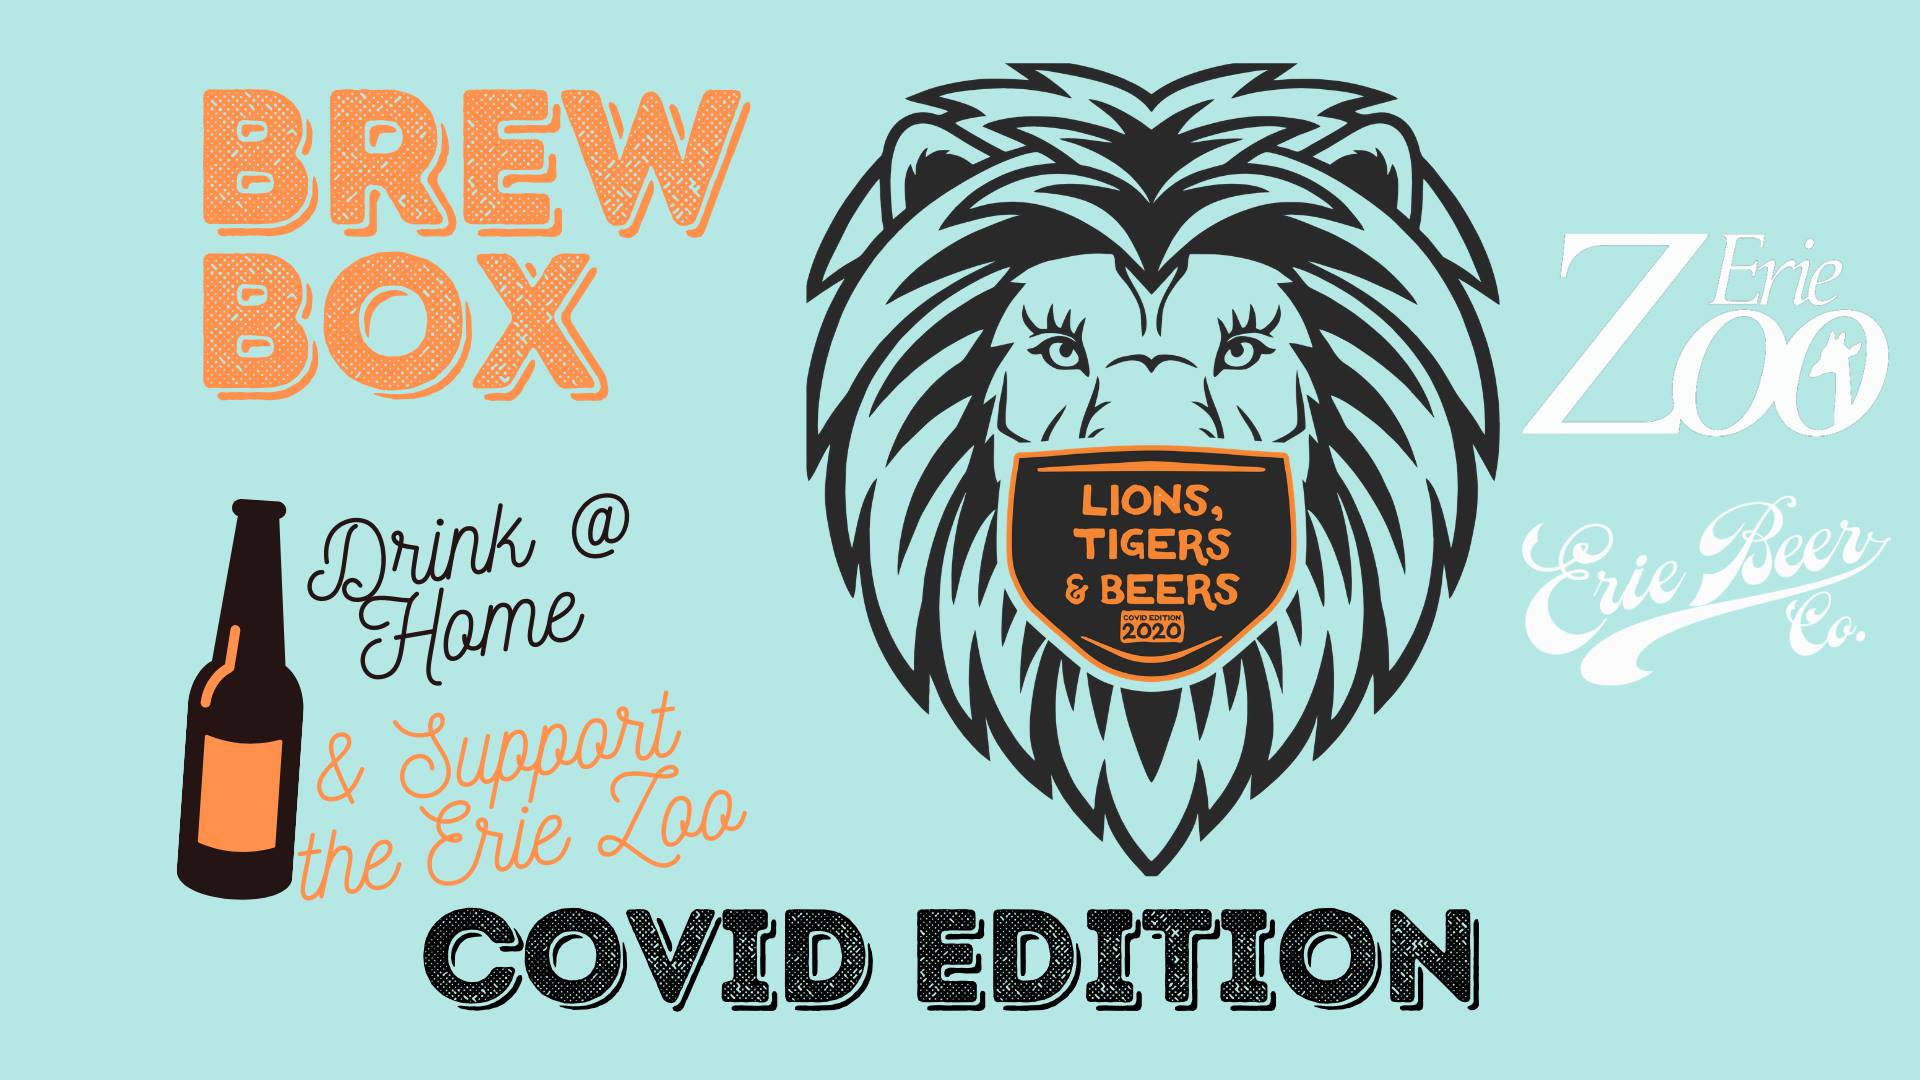 Lions, Tigers and Beers - COVID Edition!